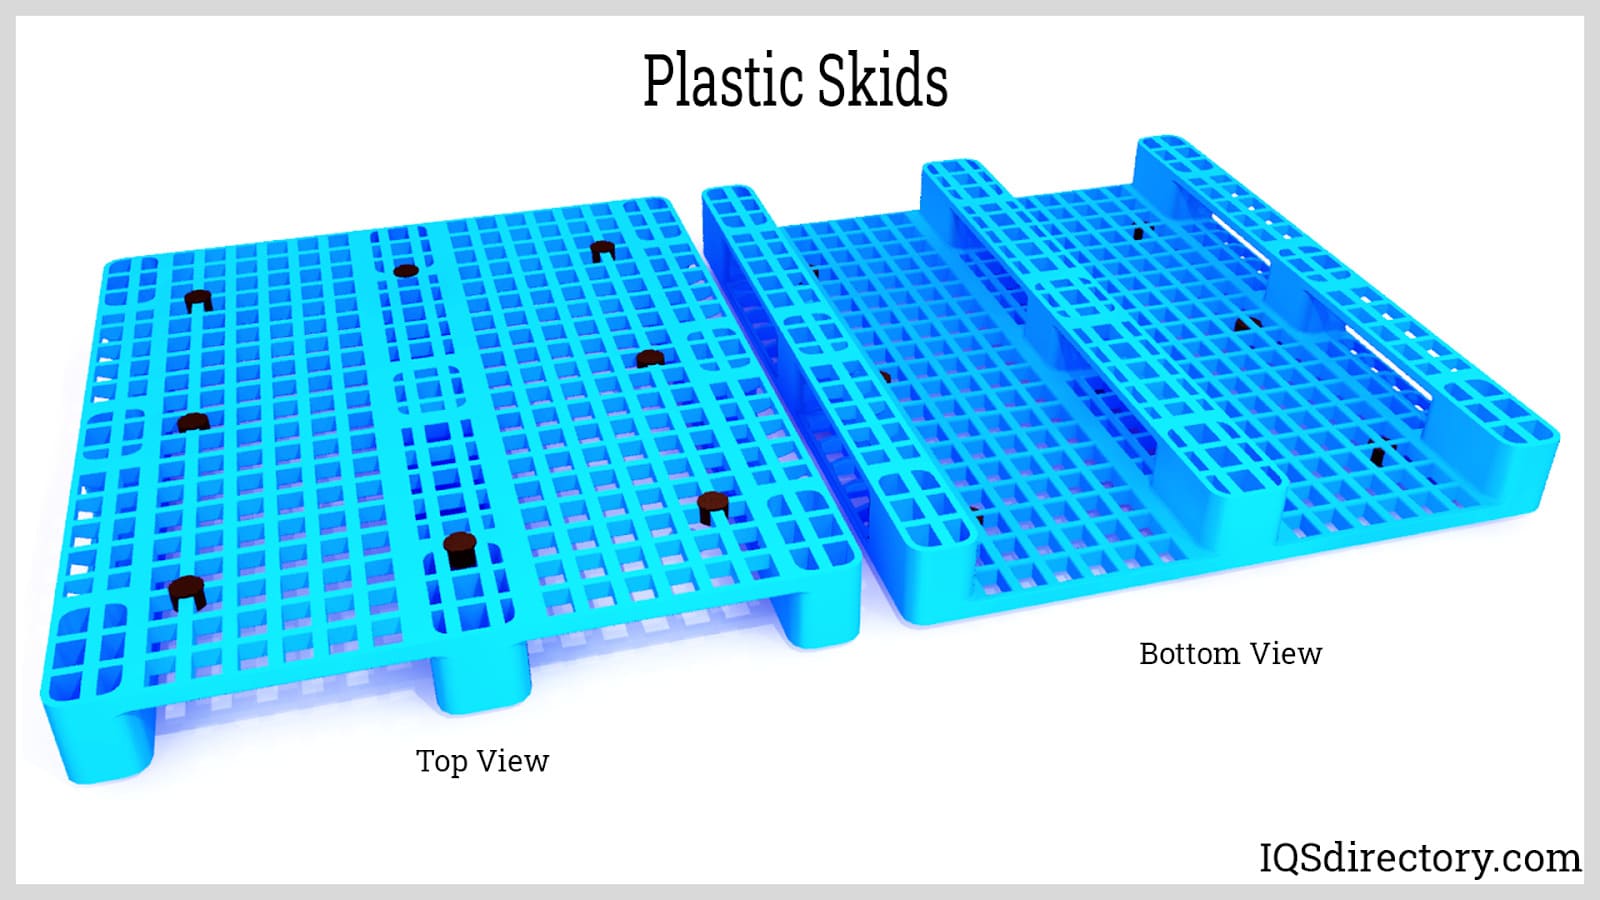 What Are The Advantages of Plastic Pallets? - Powerjet Plastic Machinery